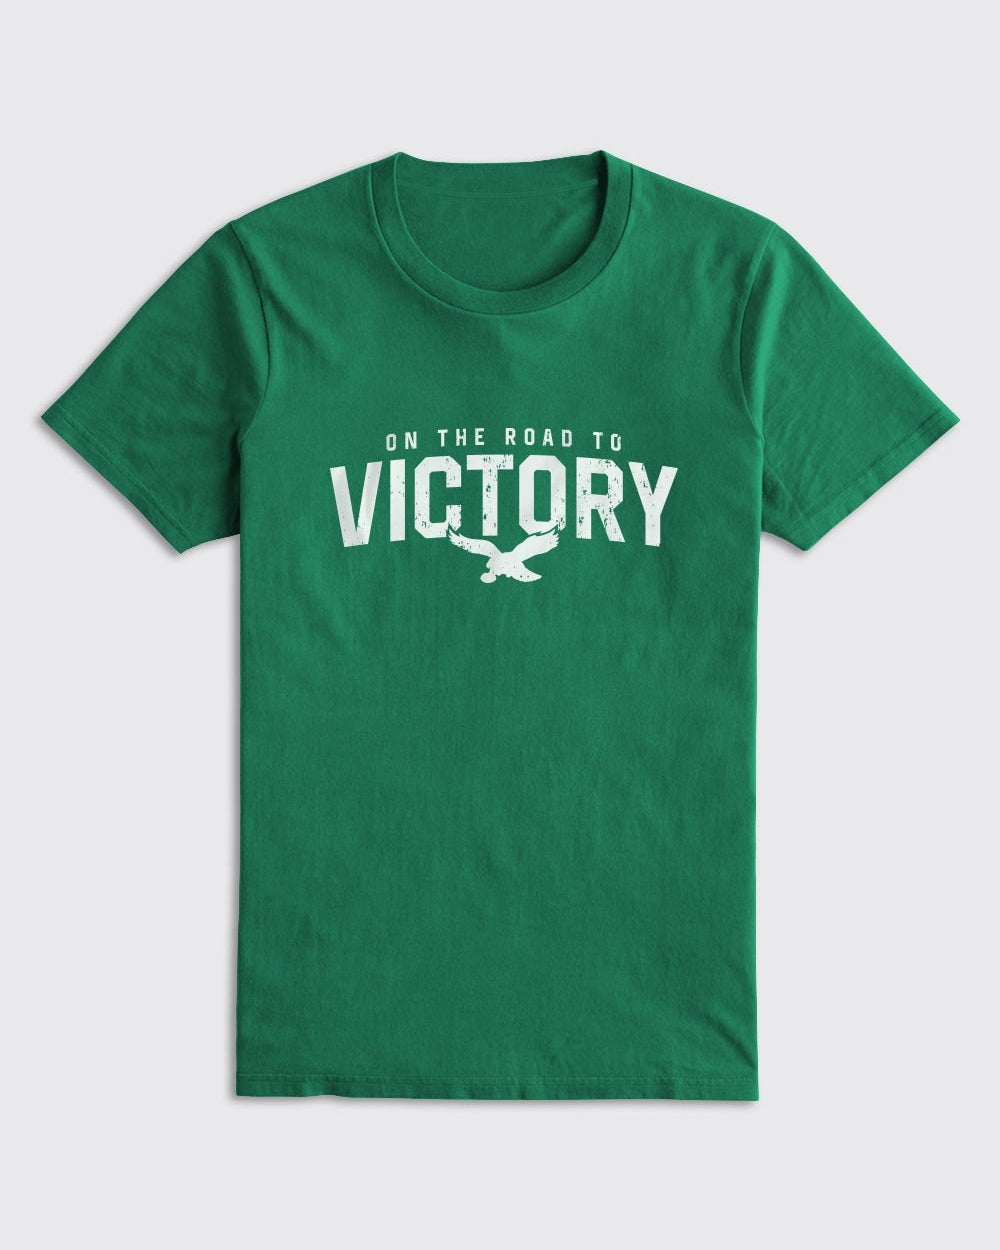 Philadelphia Eagles-On The Road To Victory Shirt-Kelly-Philly Sports Shirts